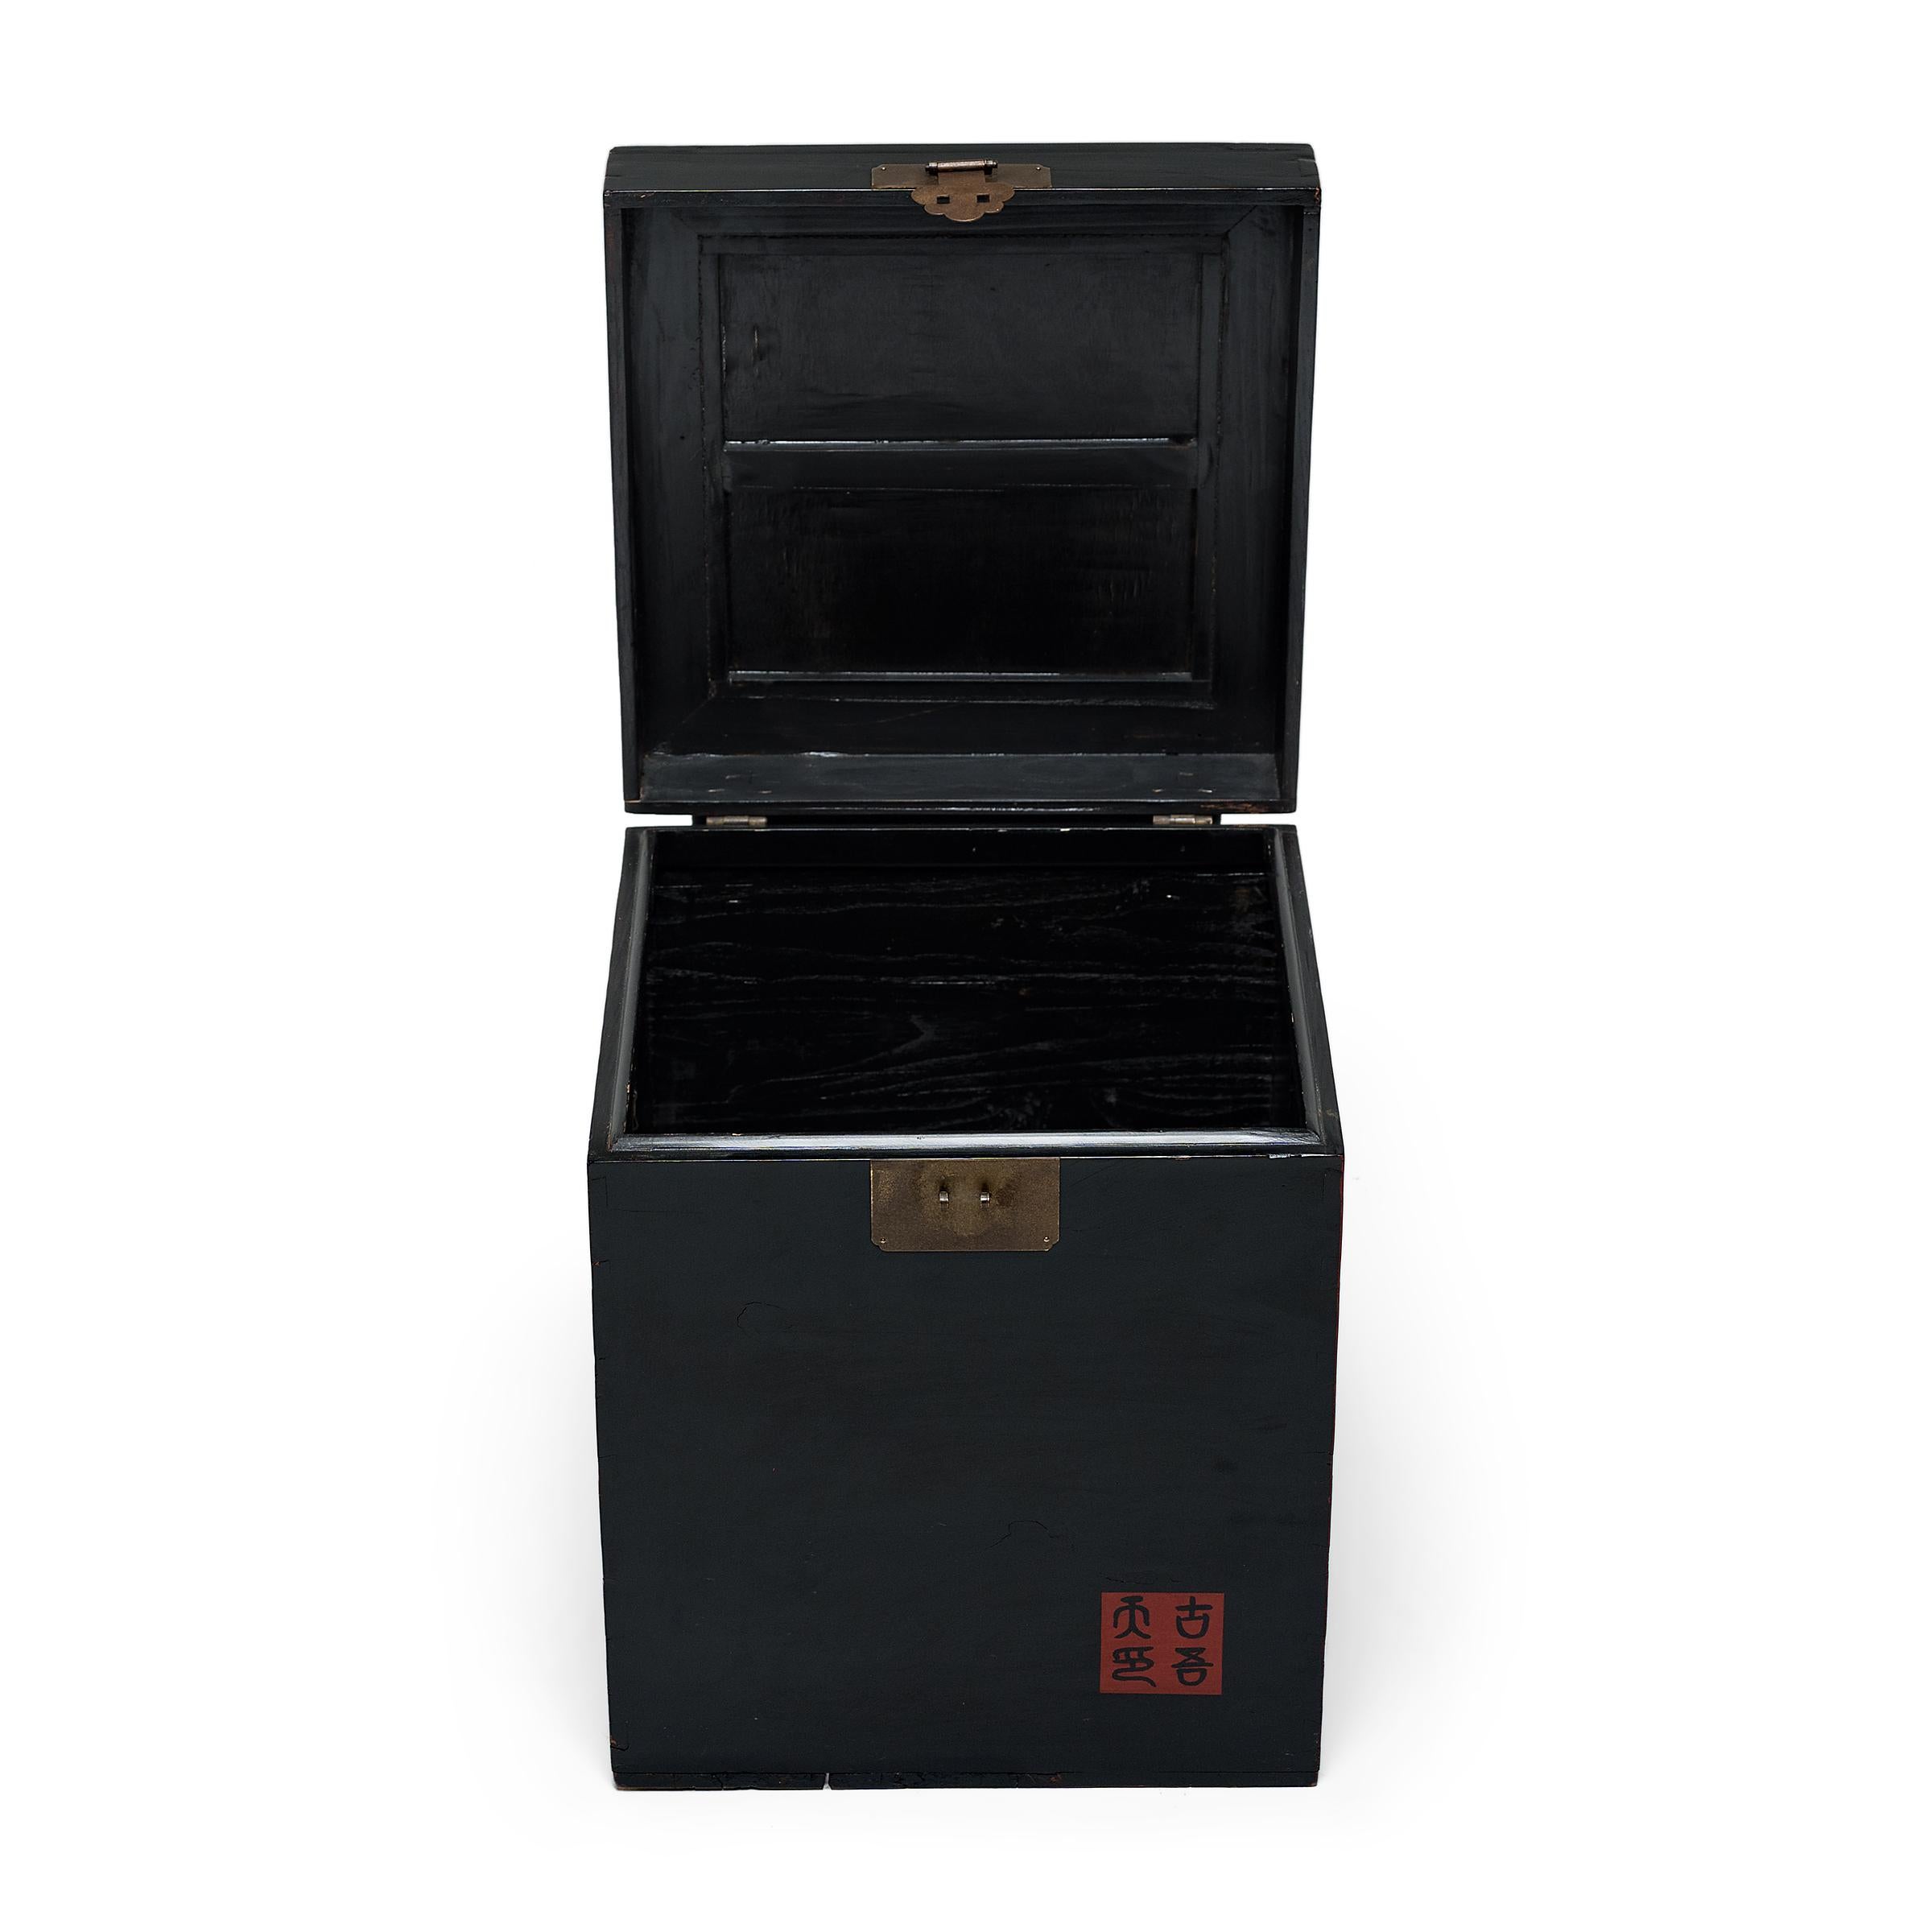 Crafted in the style of Chinese furniture, this petite storage chest is the perfect place to stow cords, toys, blankets, or anything you want stored beautifully. The square trunk features a glossy, black lacquer finish and a woven lidded top